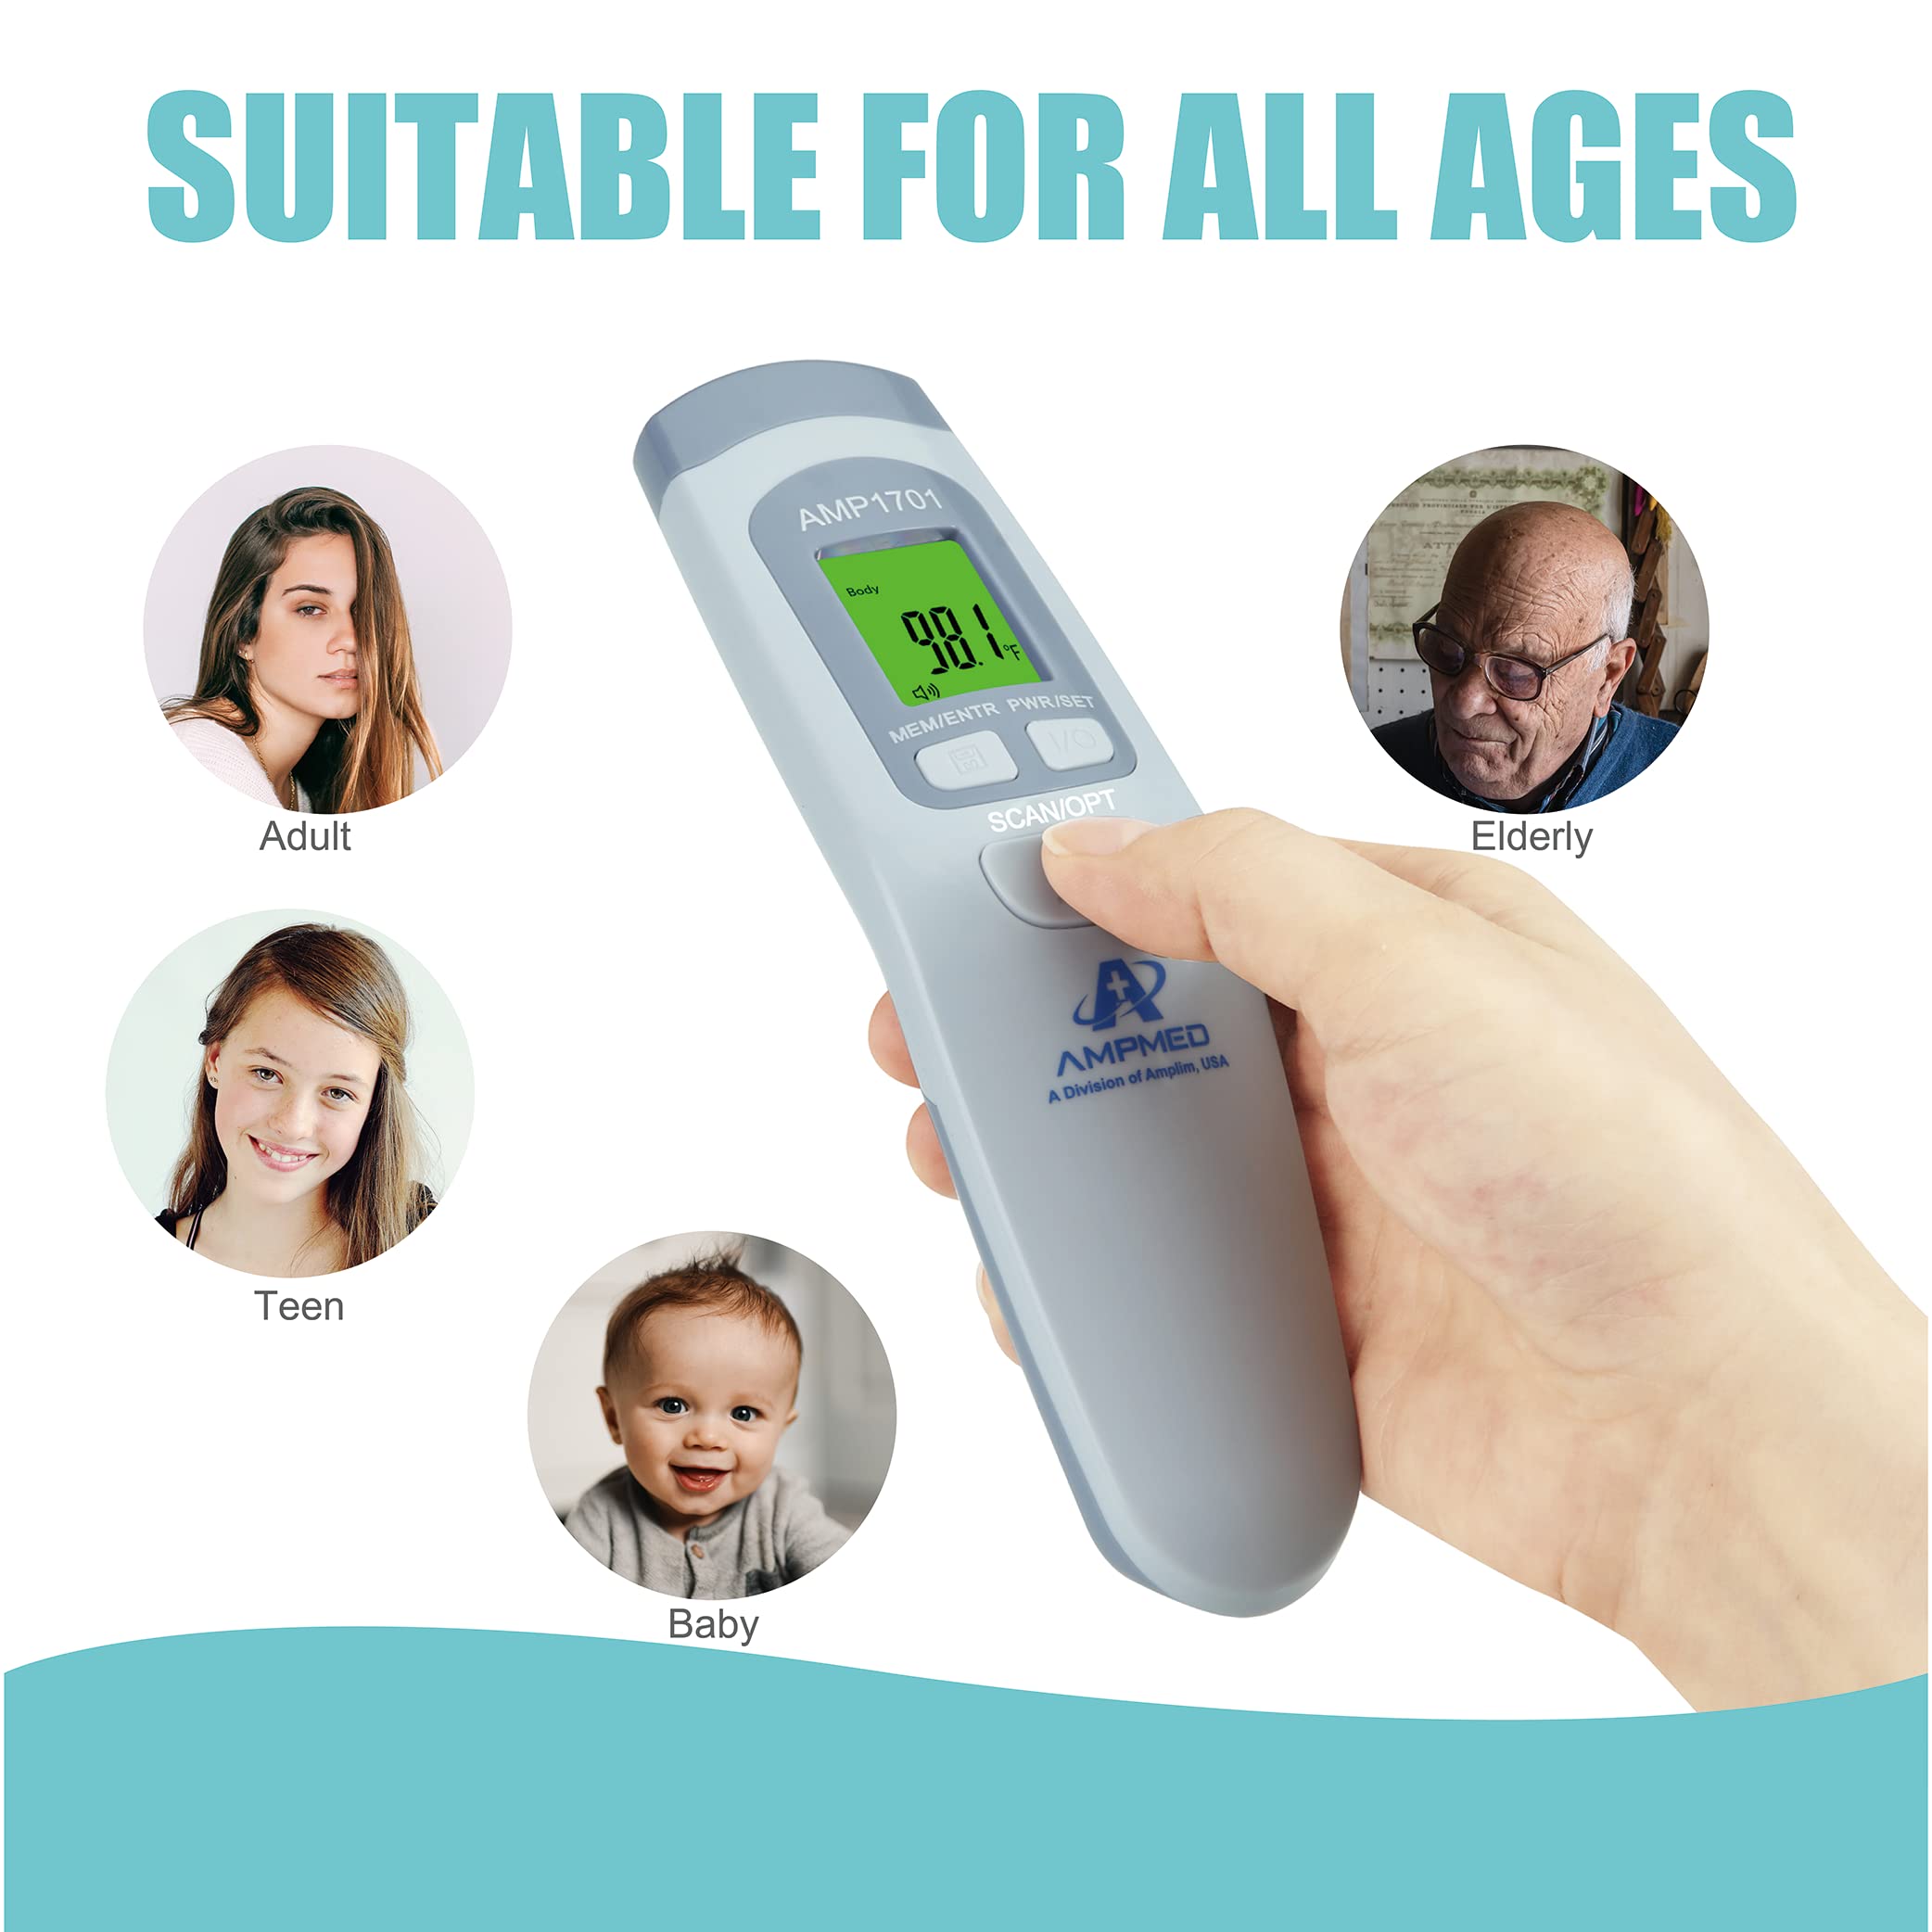 Amplim Non Contact/No Touch Forehead Thermometer for Adults, Kids, and Babies, Accurate Hospital Medical Grade Touchless Temporal Thermometer FSA HSA Approved, Serenity